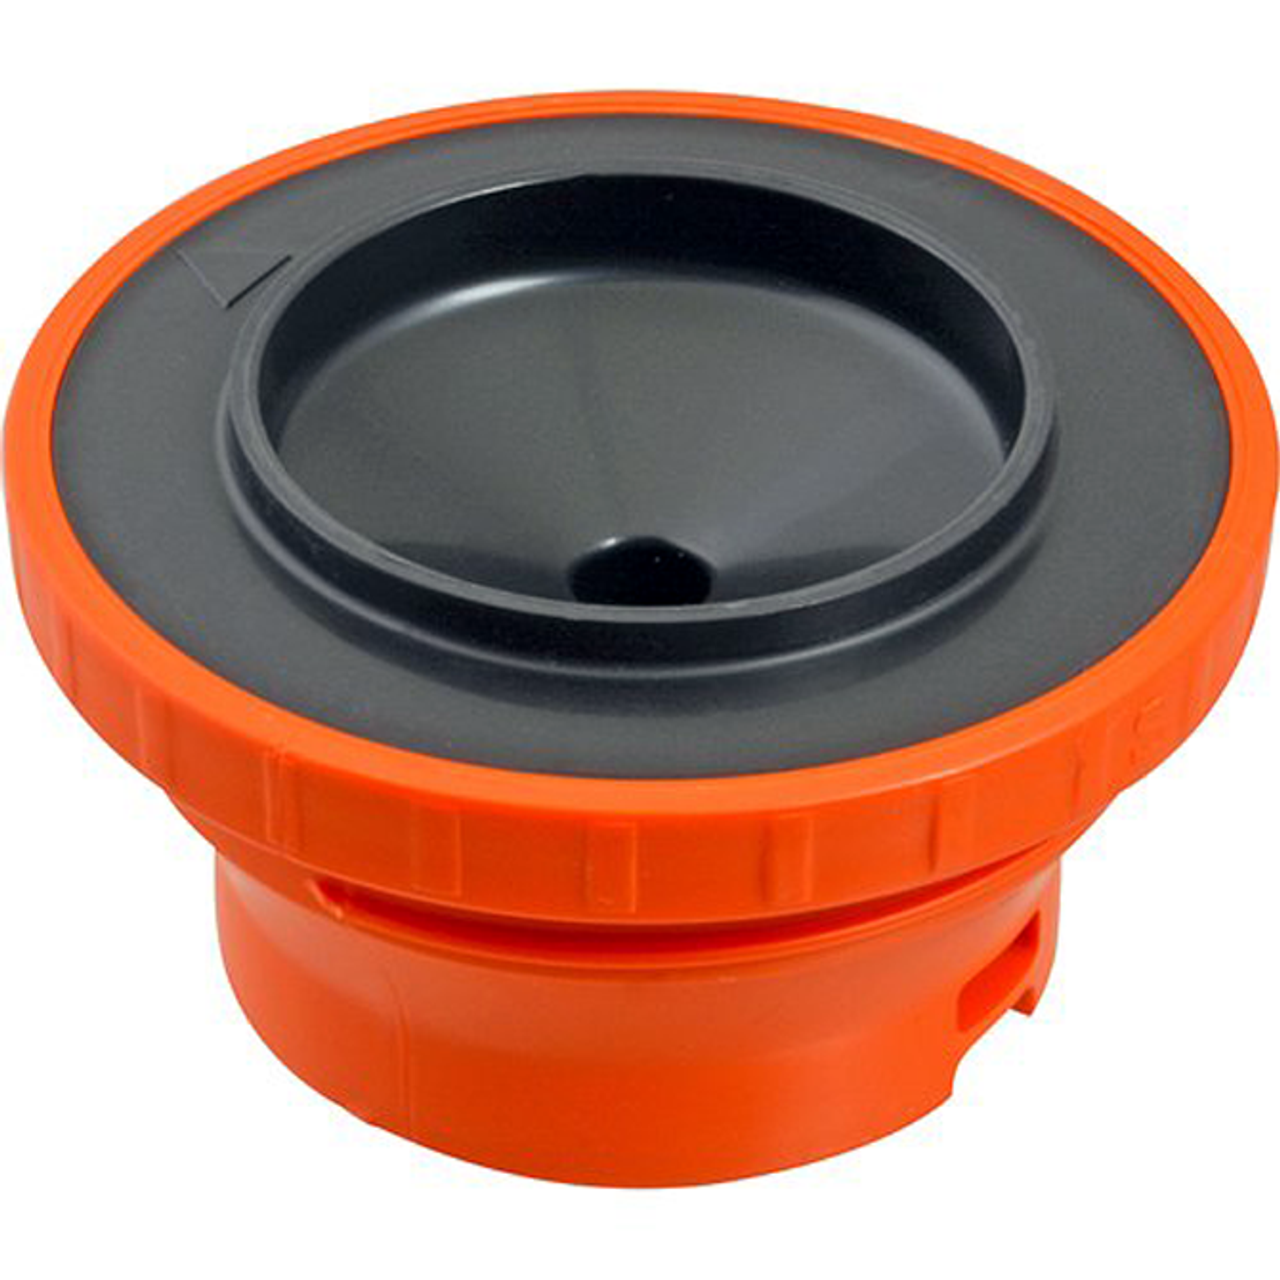 Bunn Deluxe Thermal Carafe Orange Decaf Lid Assembly